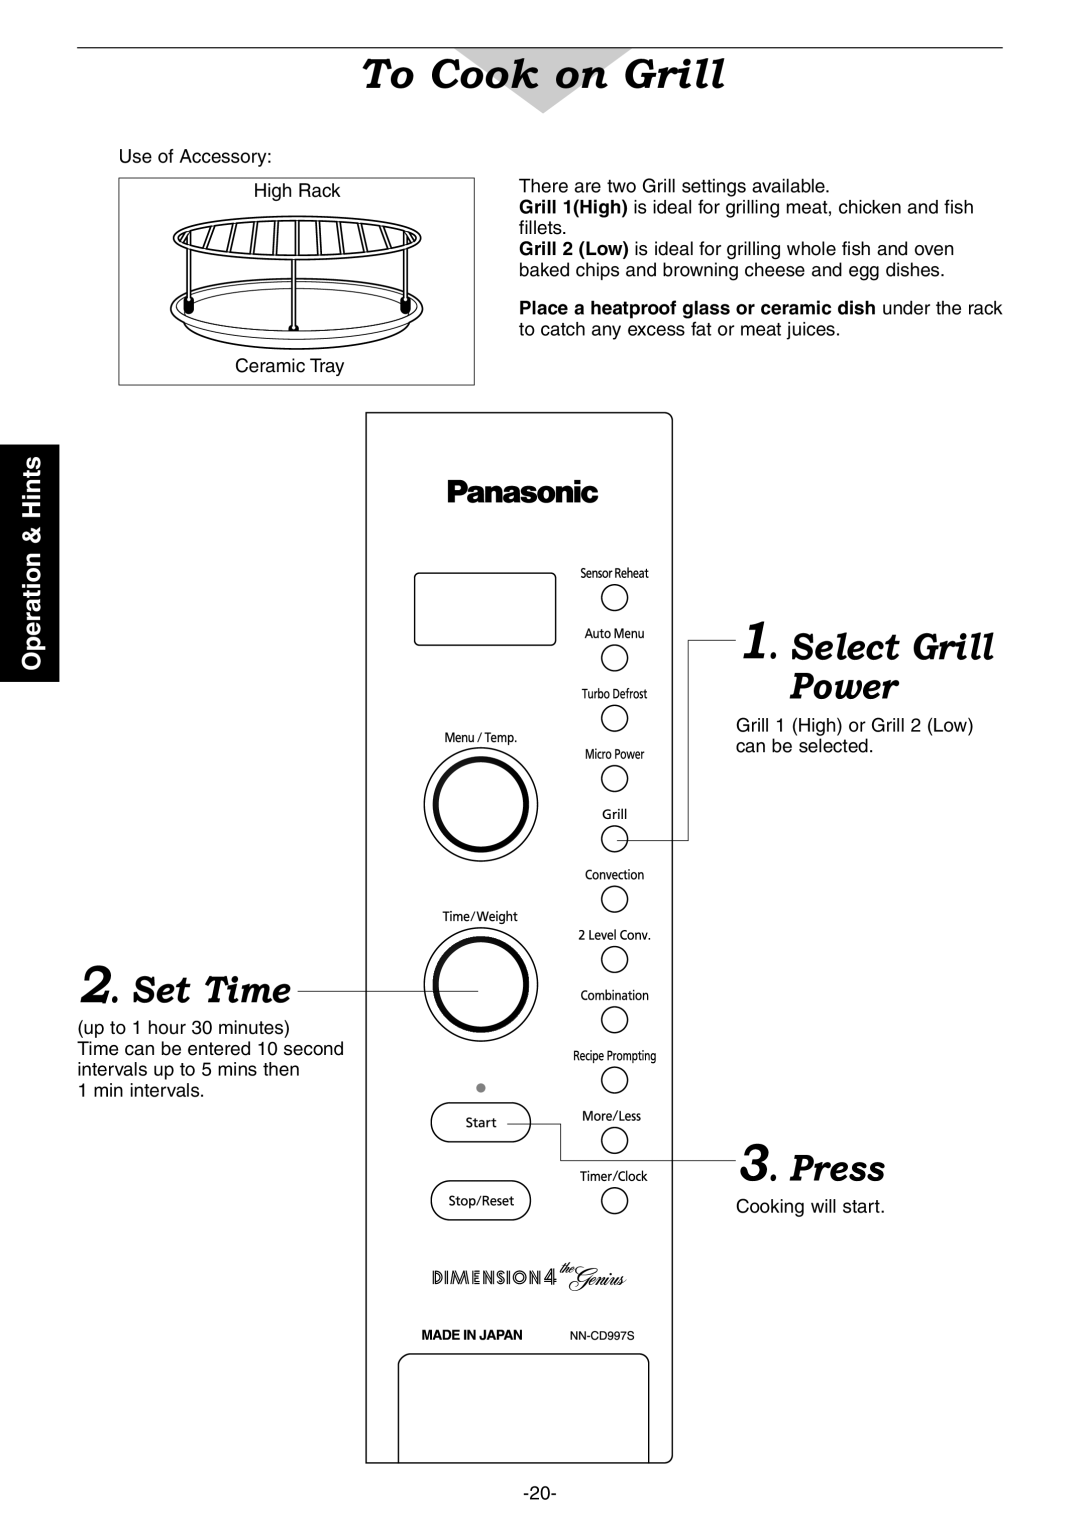 Panasonic NN-CD987W, NN-CD997S manual To Cook on Grill, Set Time, Select Grill Power, Press, Operation & Hints 